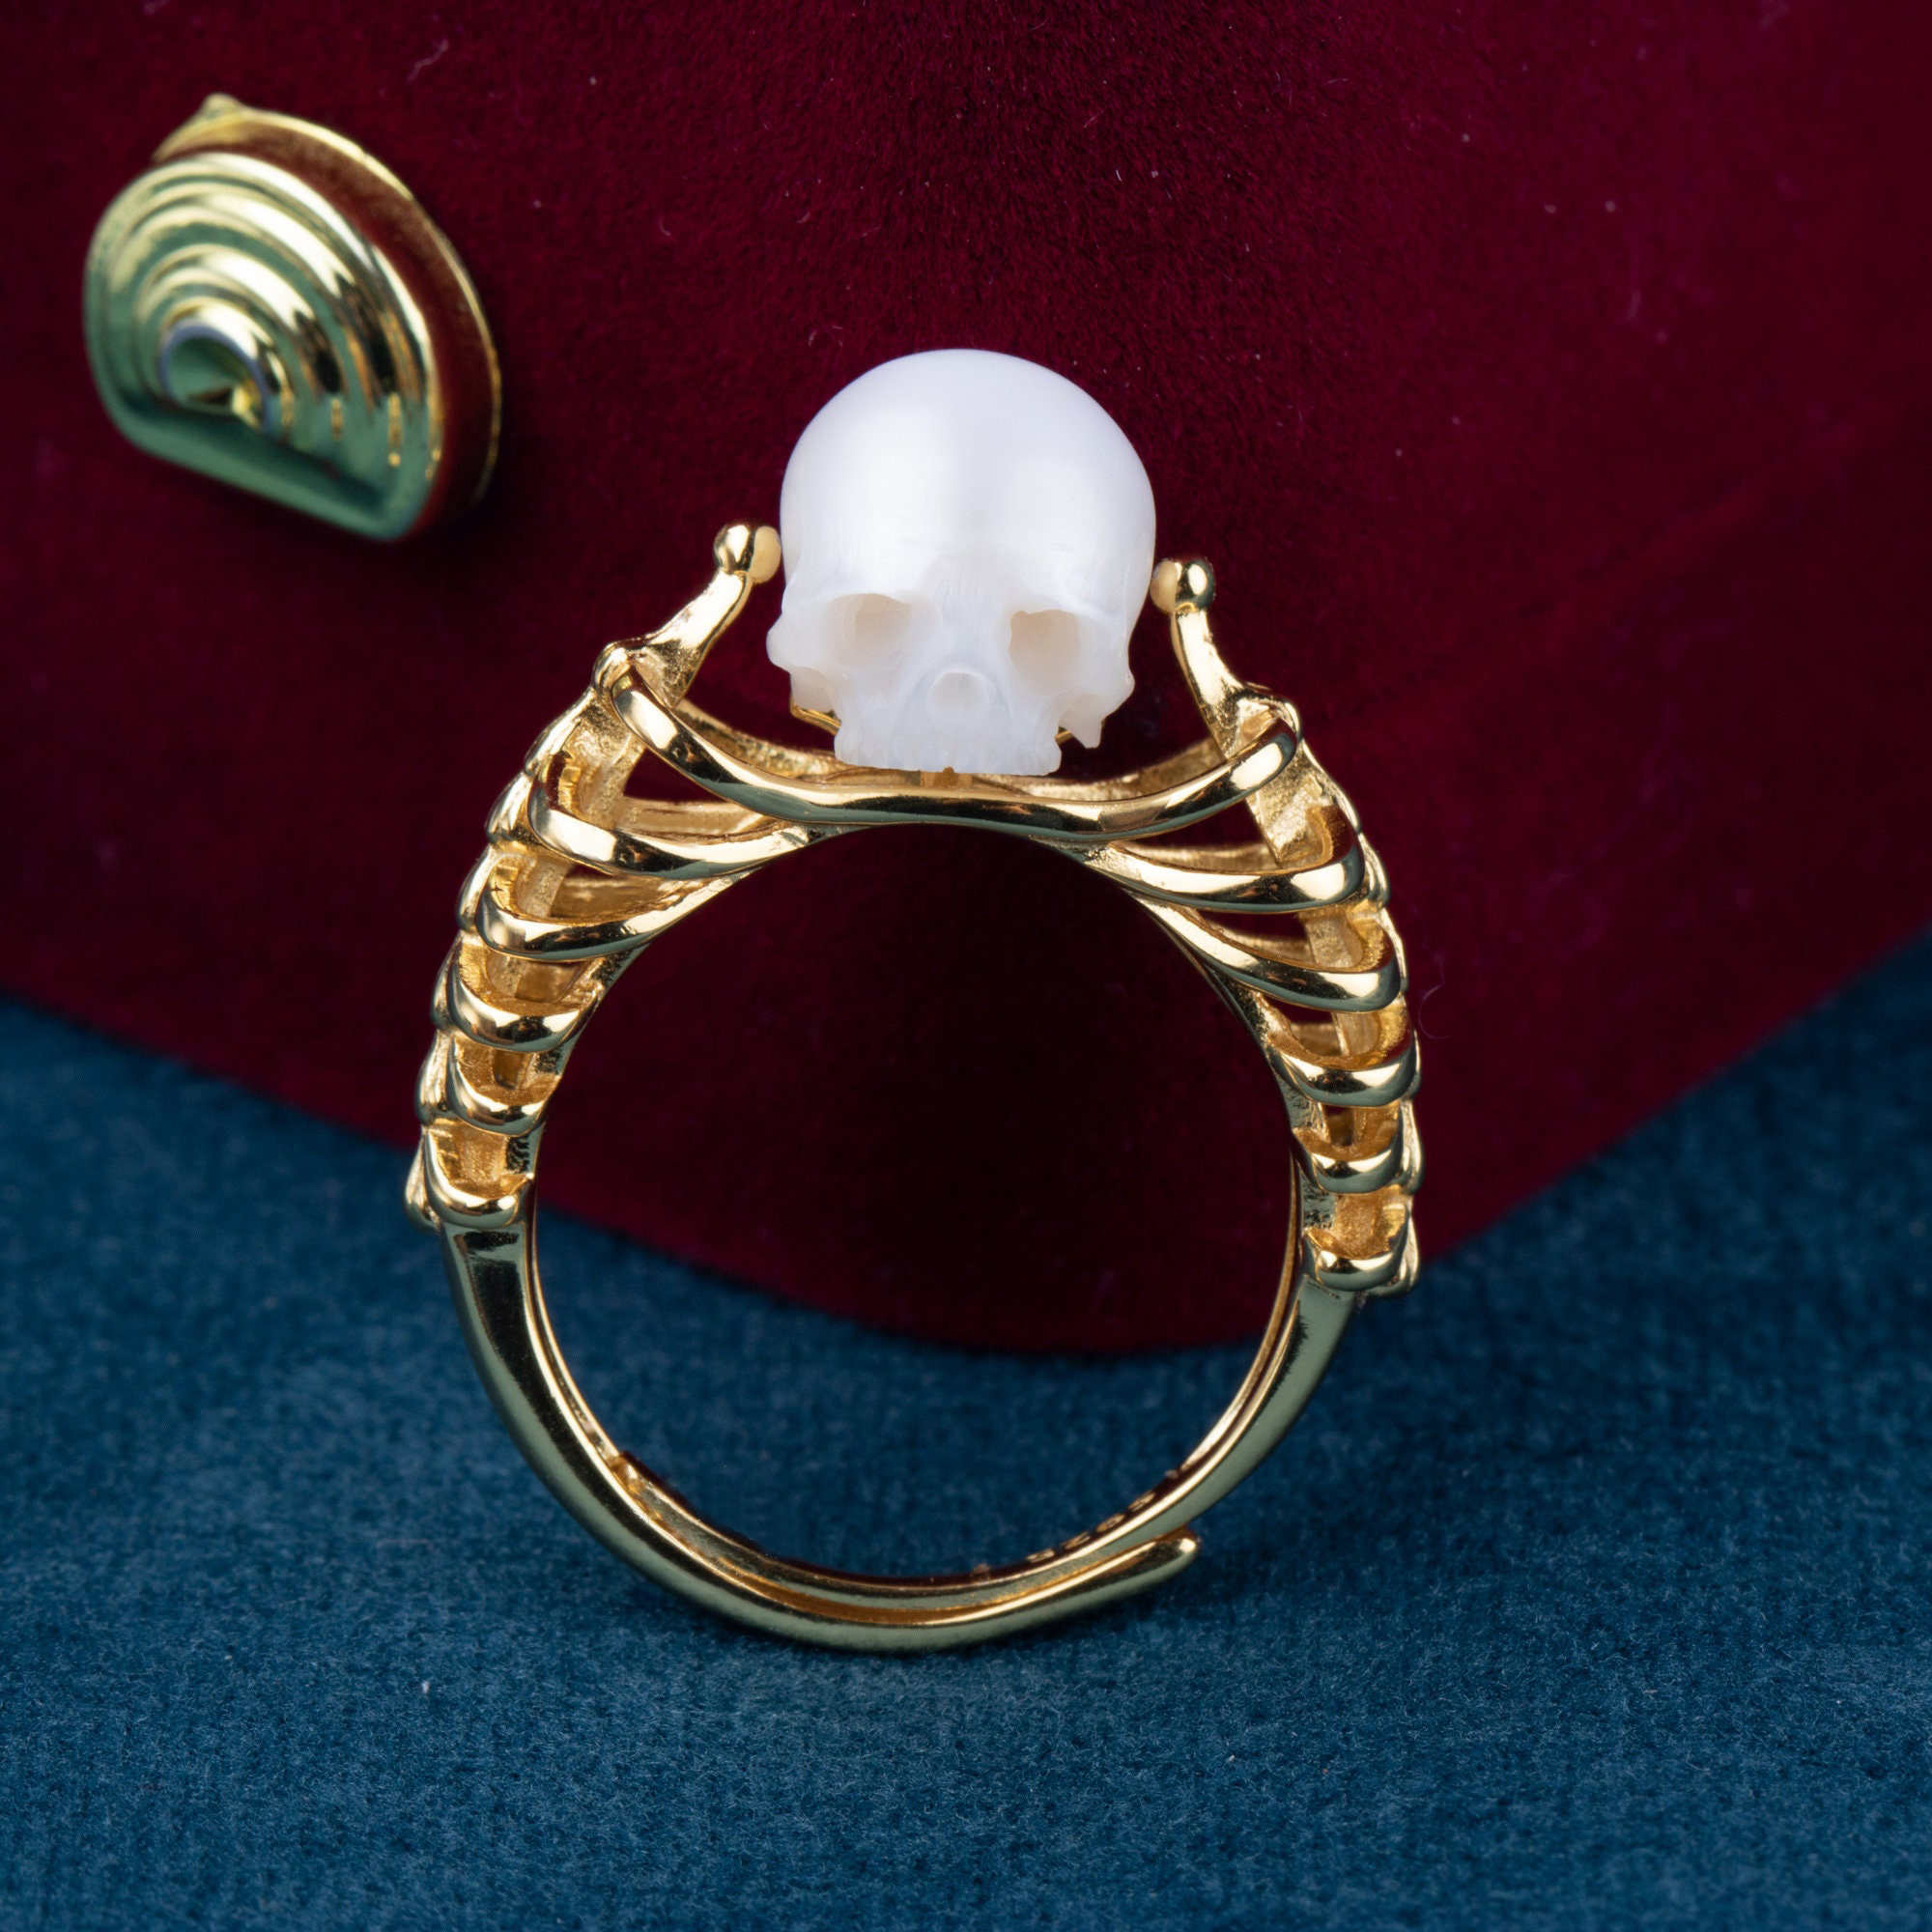 Adjustable Vintage Double Rib Cage Skull Ring💀-Vigg Jewelry